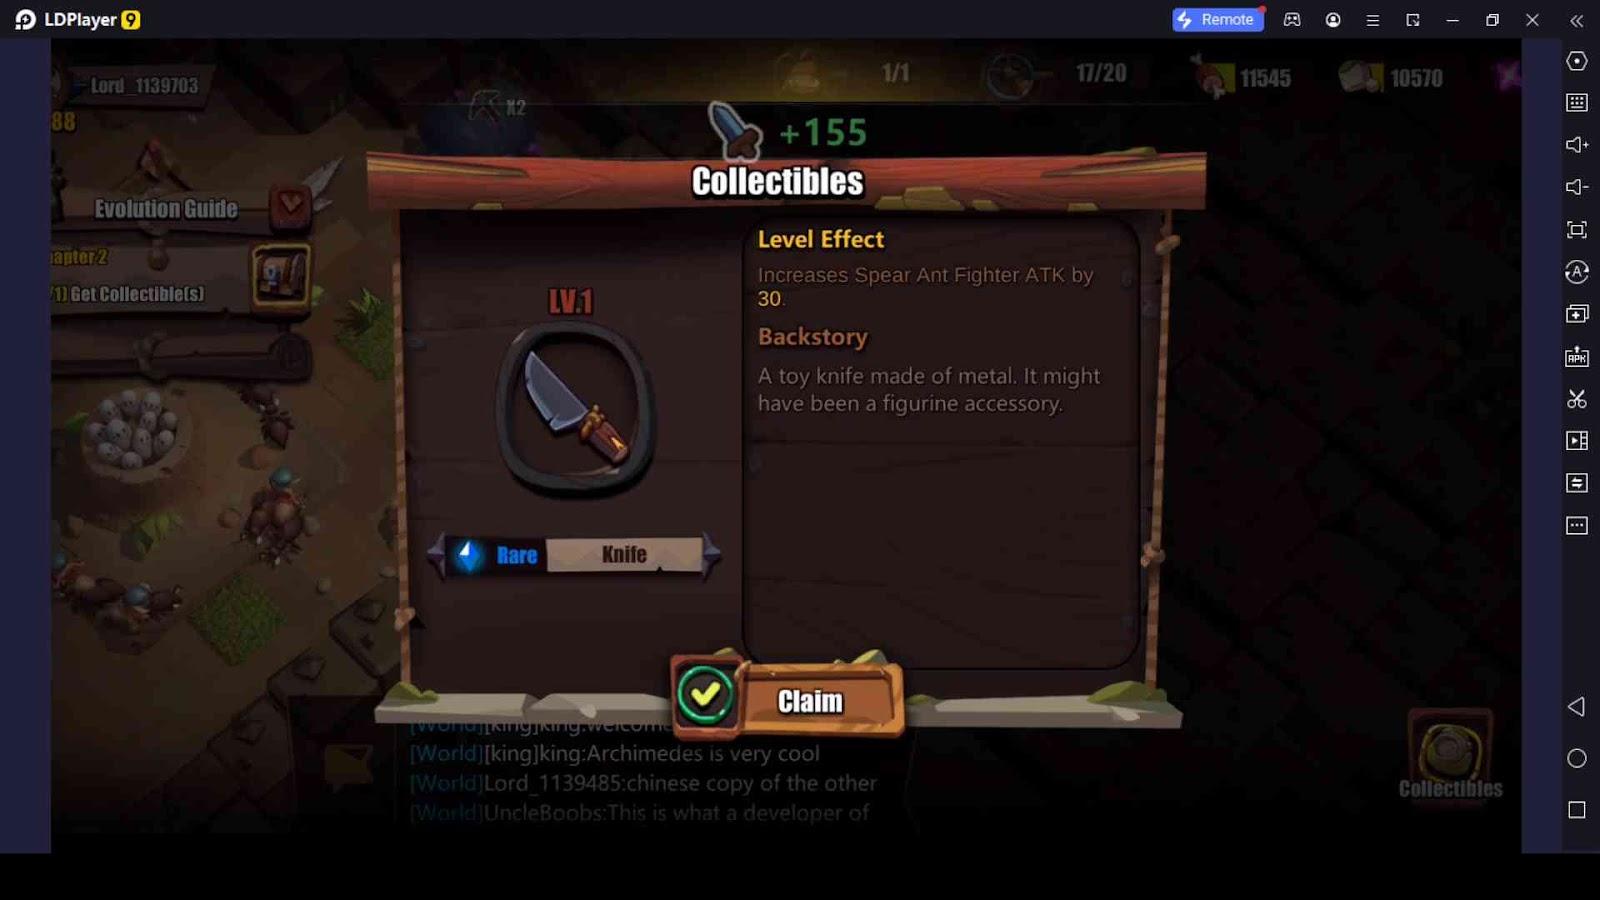 Collectibles Offer the Best Rewards